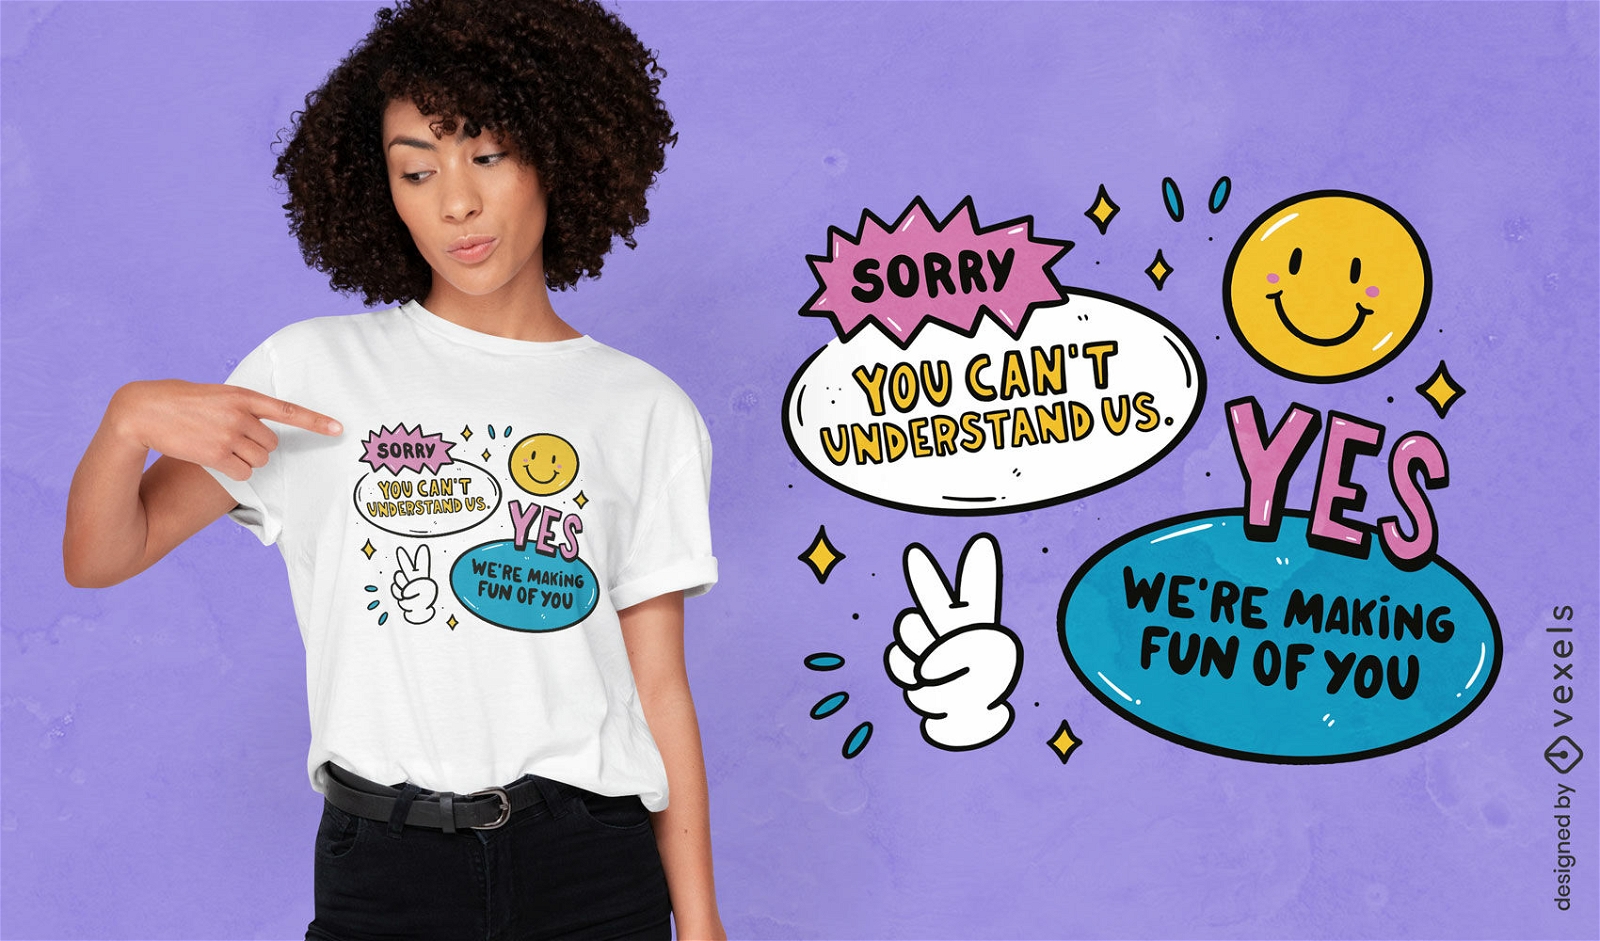 Funny we're making fun of you quote t-shirt design